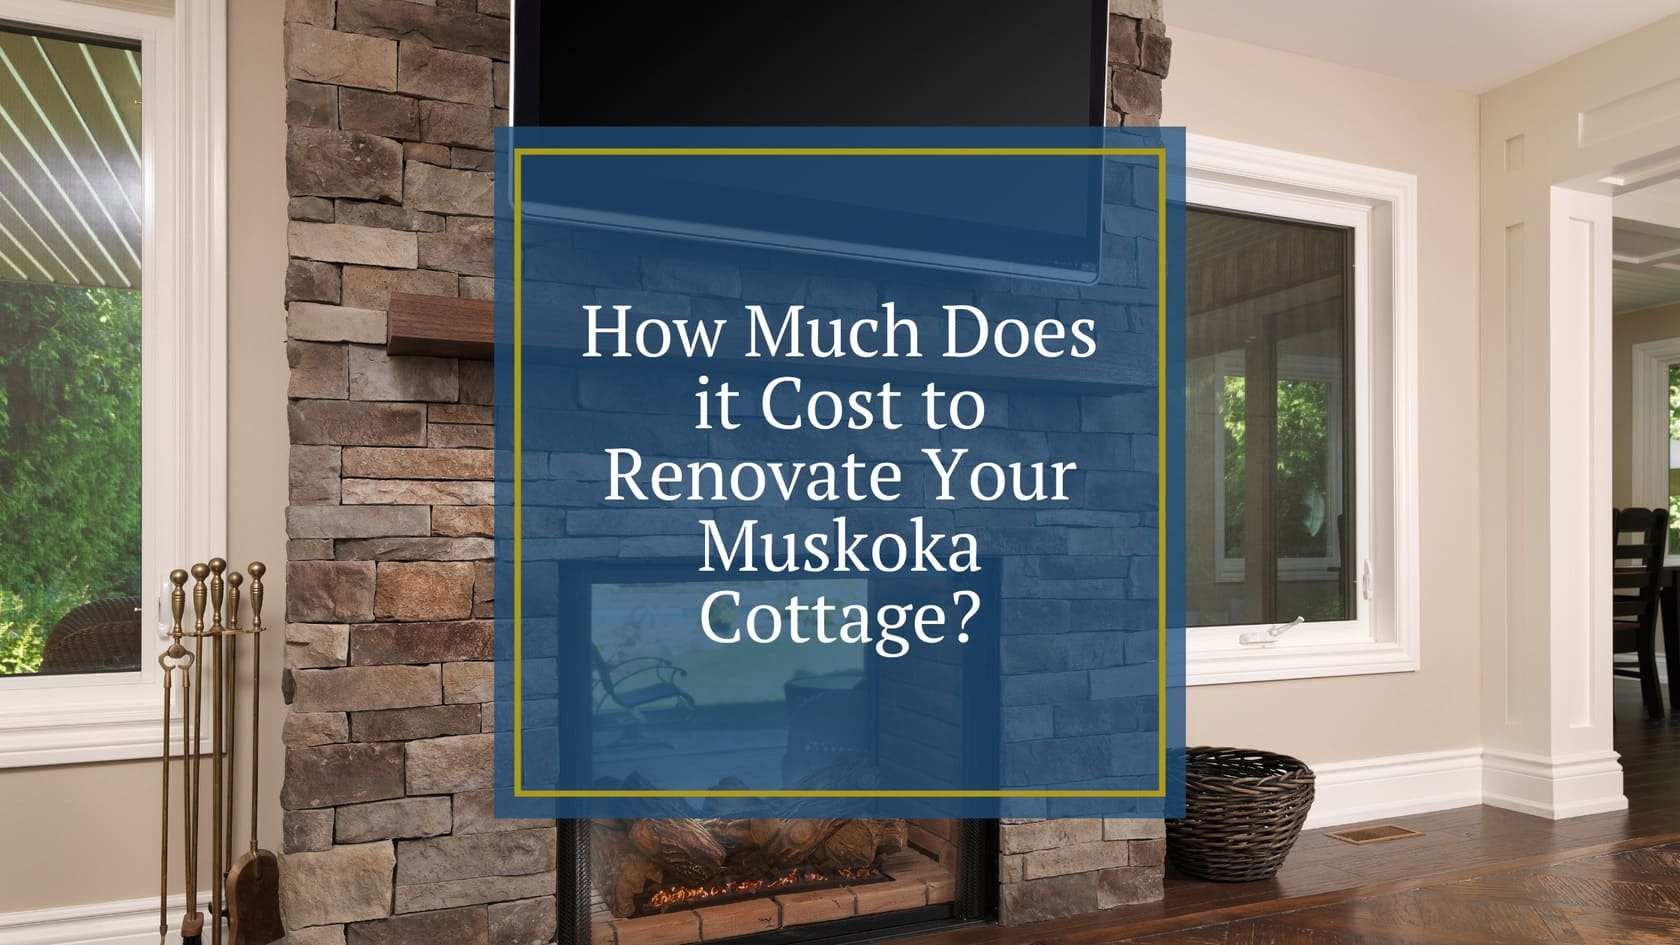 How Much Does it Cost to Renovate Your Muskoka Cottage?